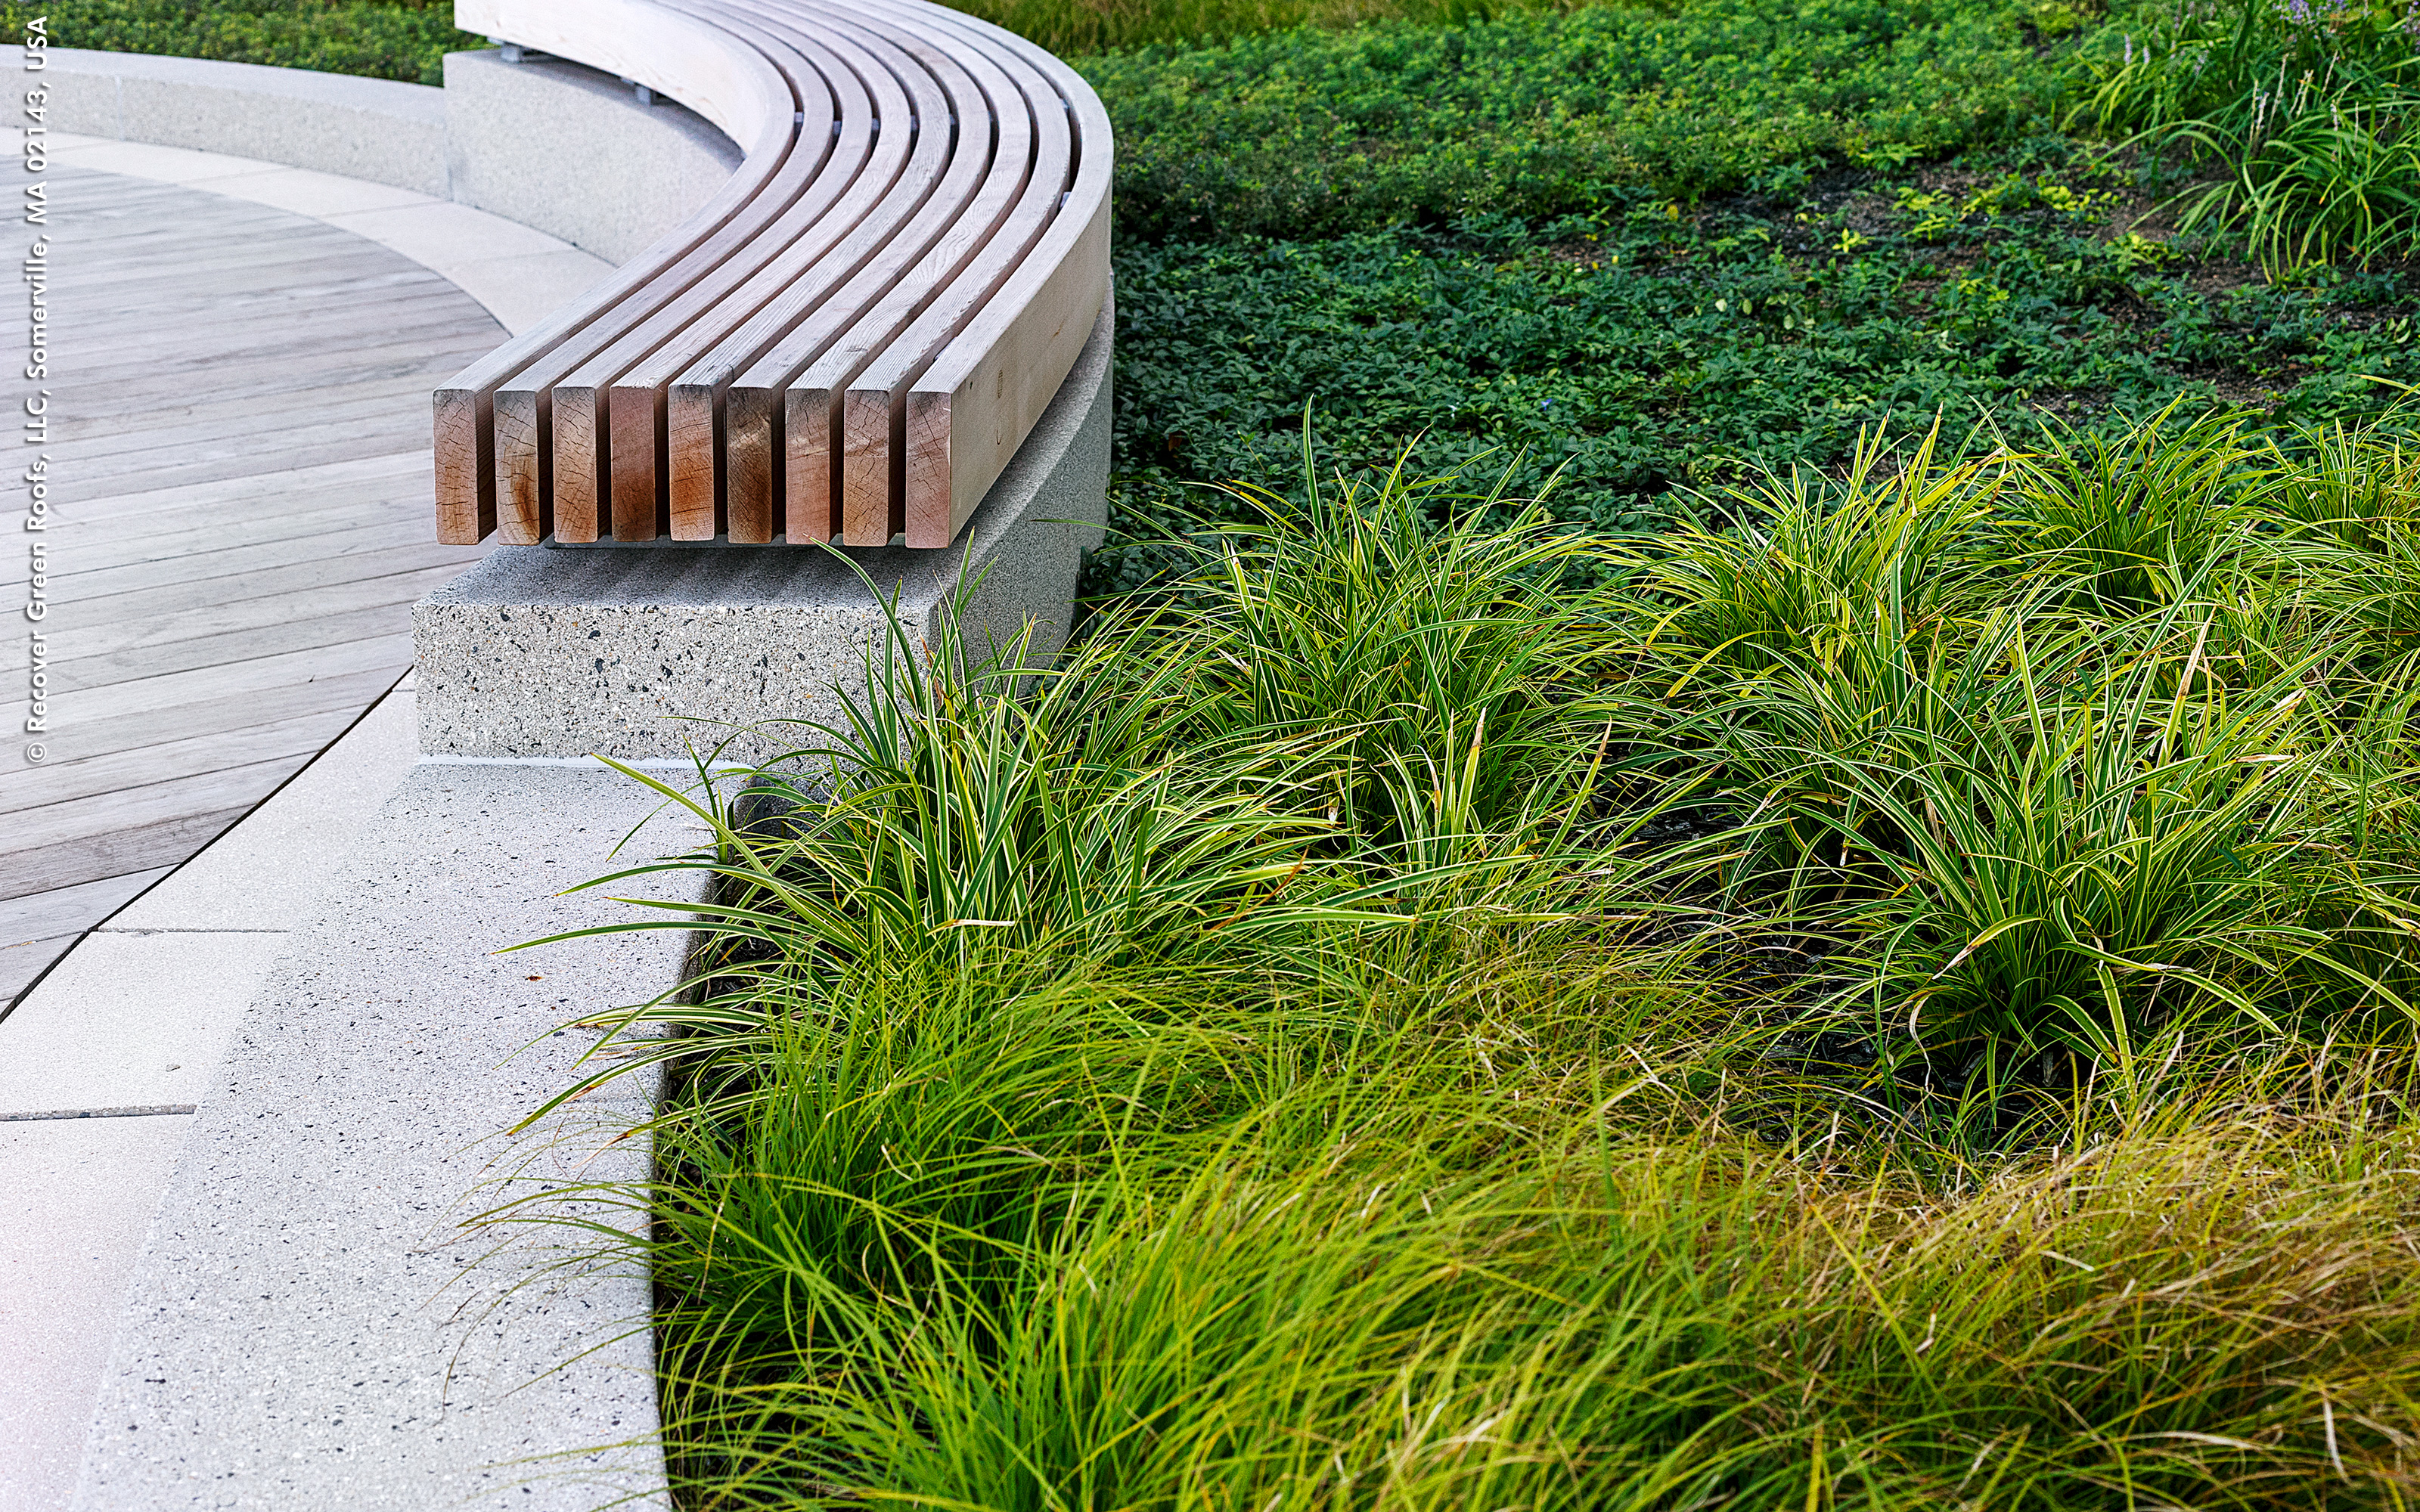 Curved bench and plant bed with grasses